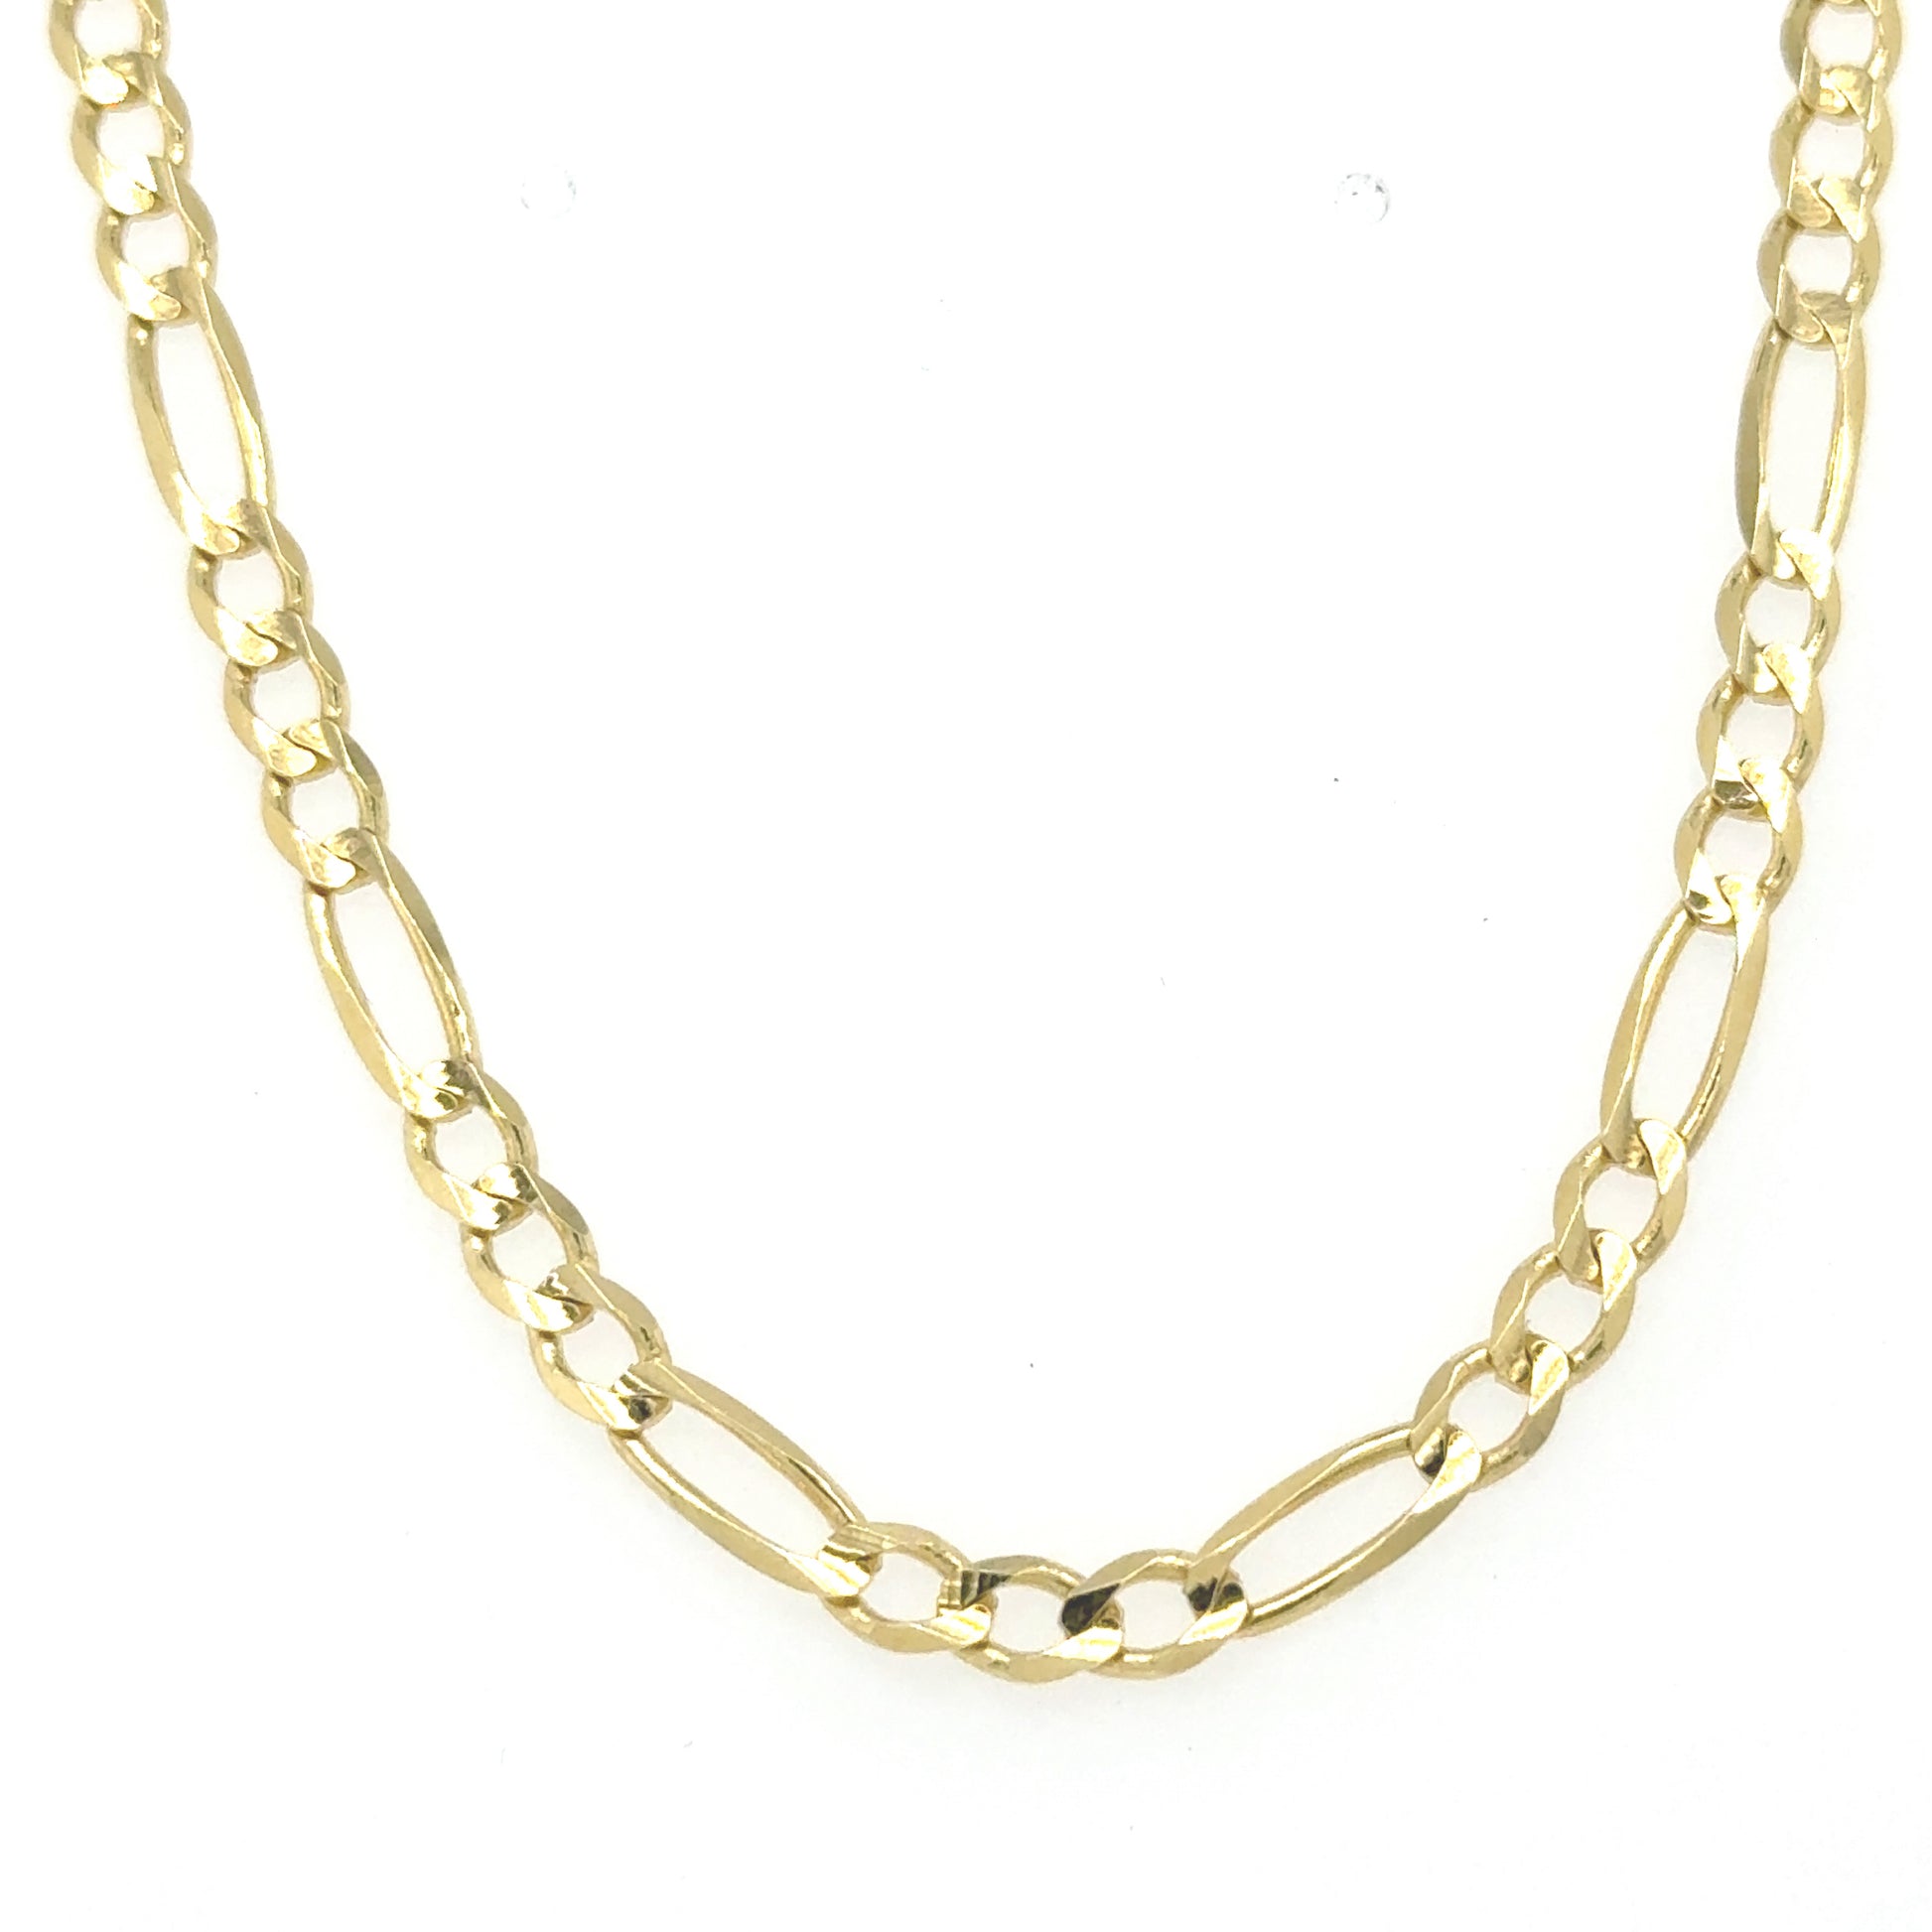 Solid Figaro chain crafted from 14K yellow gold with a 3.5mm width.